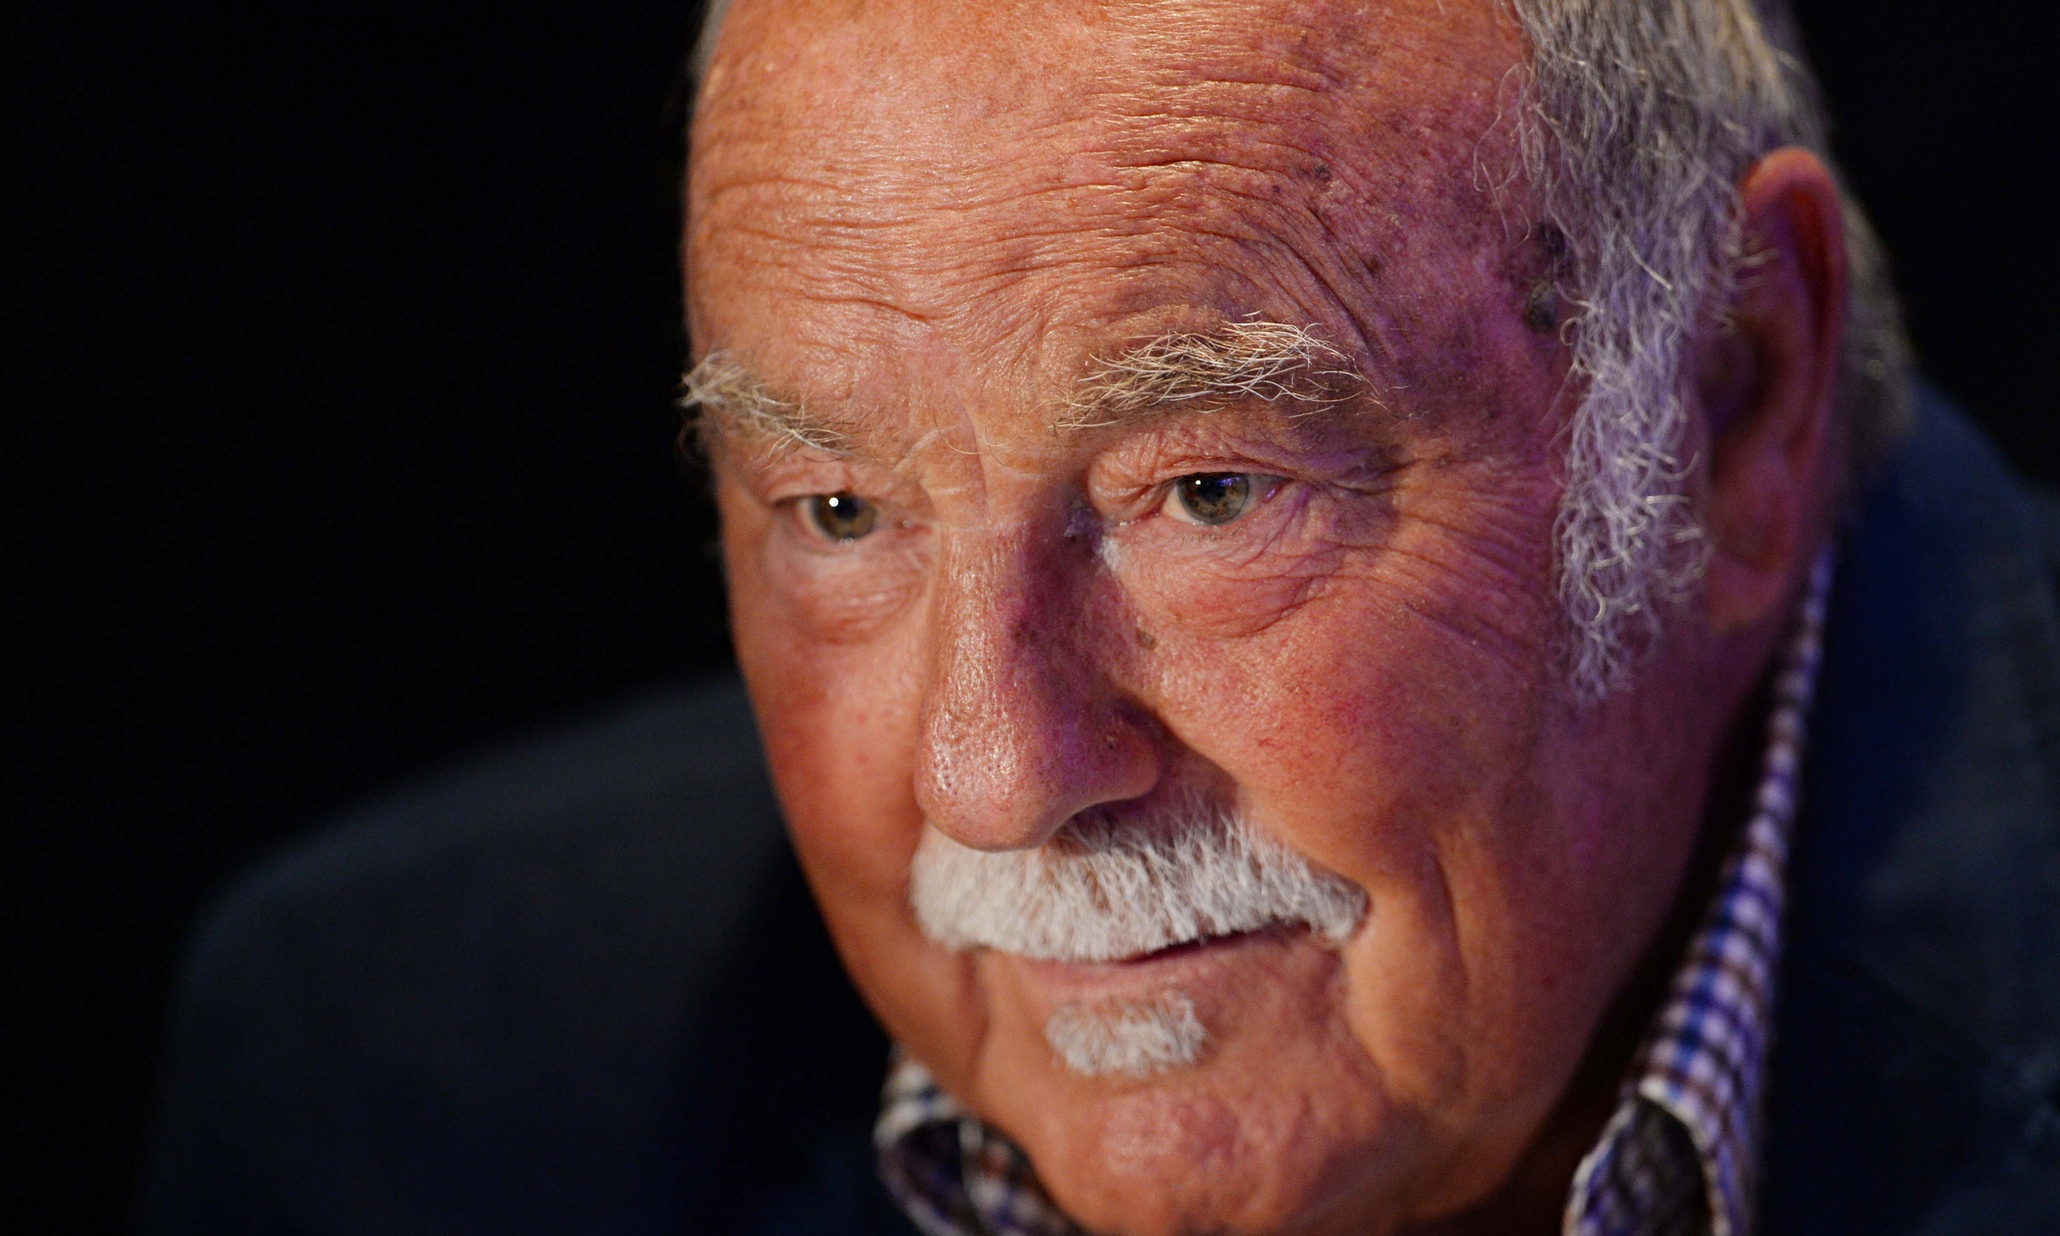 Jimmy Greaves in intensive care after suffering stroke | Football | The Guardian2060 x 1236